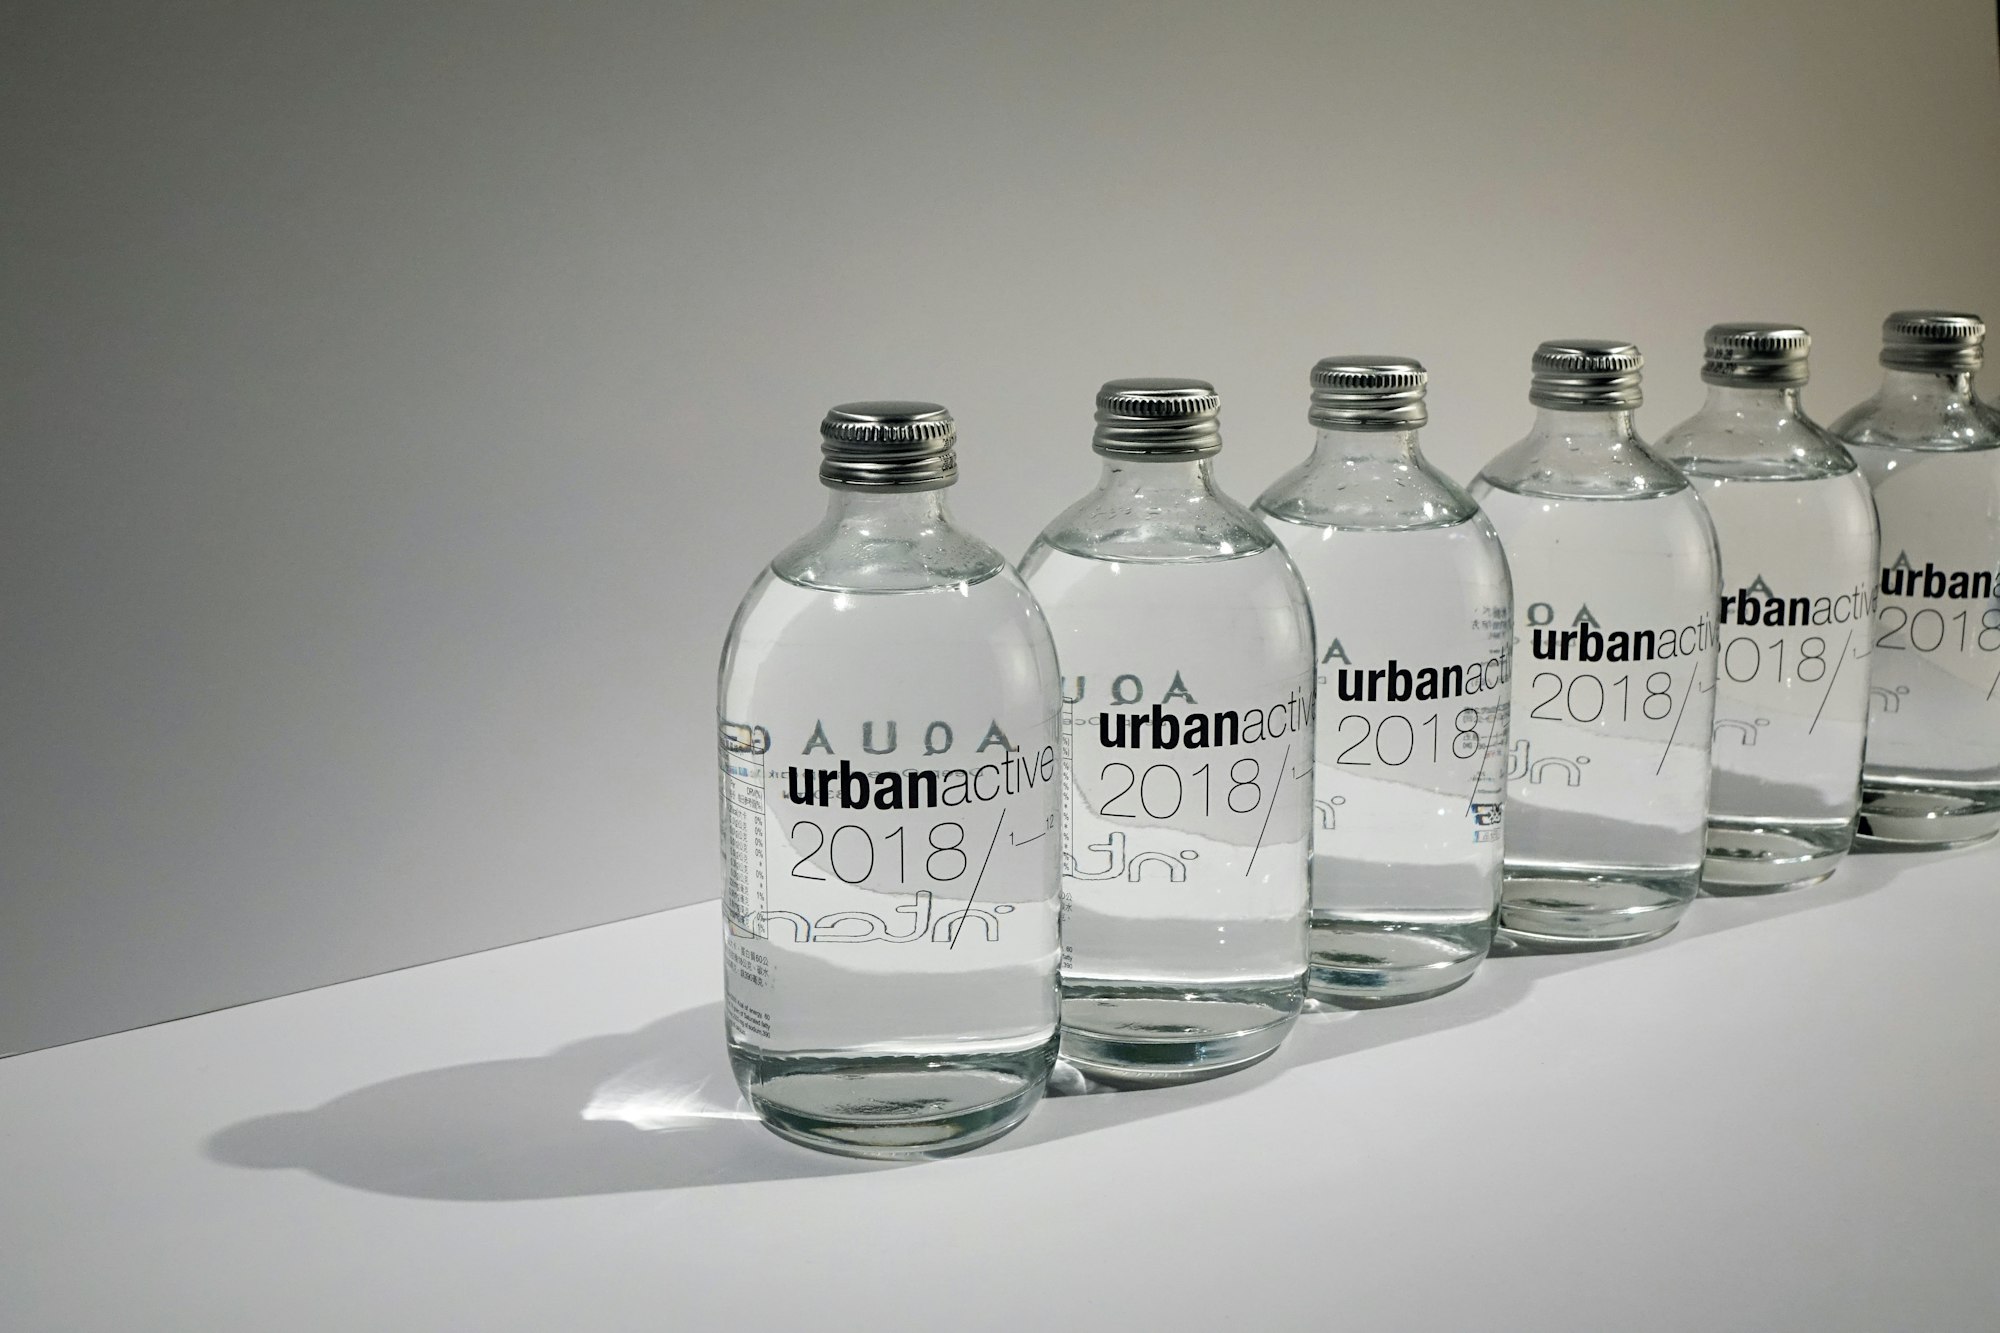 Row of Intenza's Urban Active Campaign 2018 sparkling water lined up.